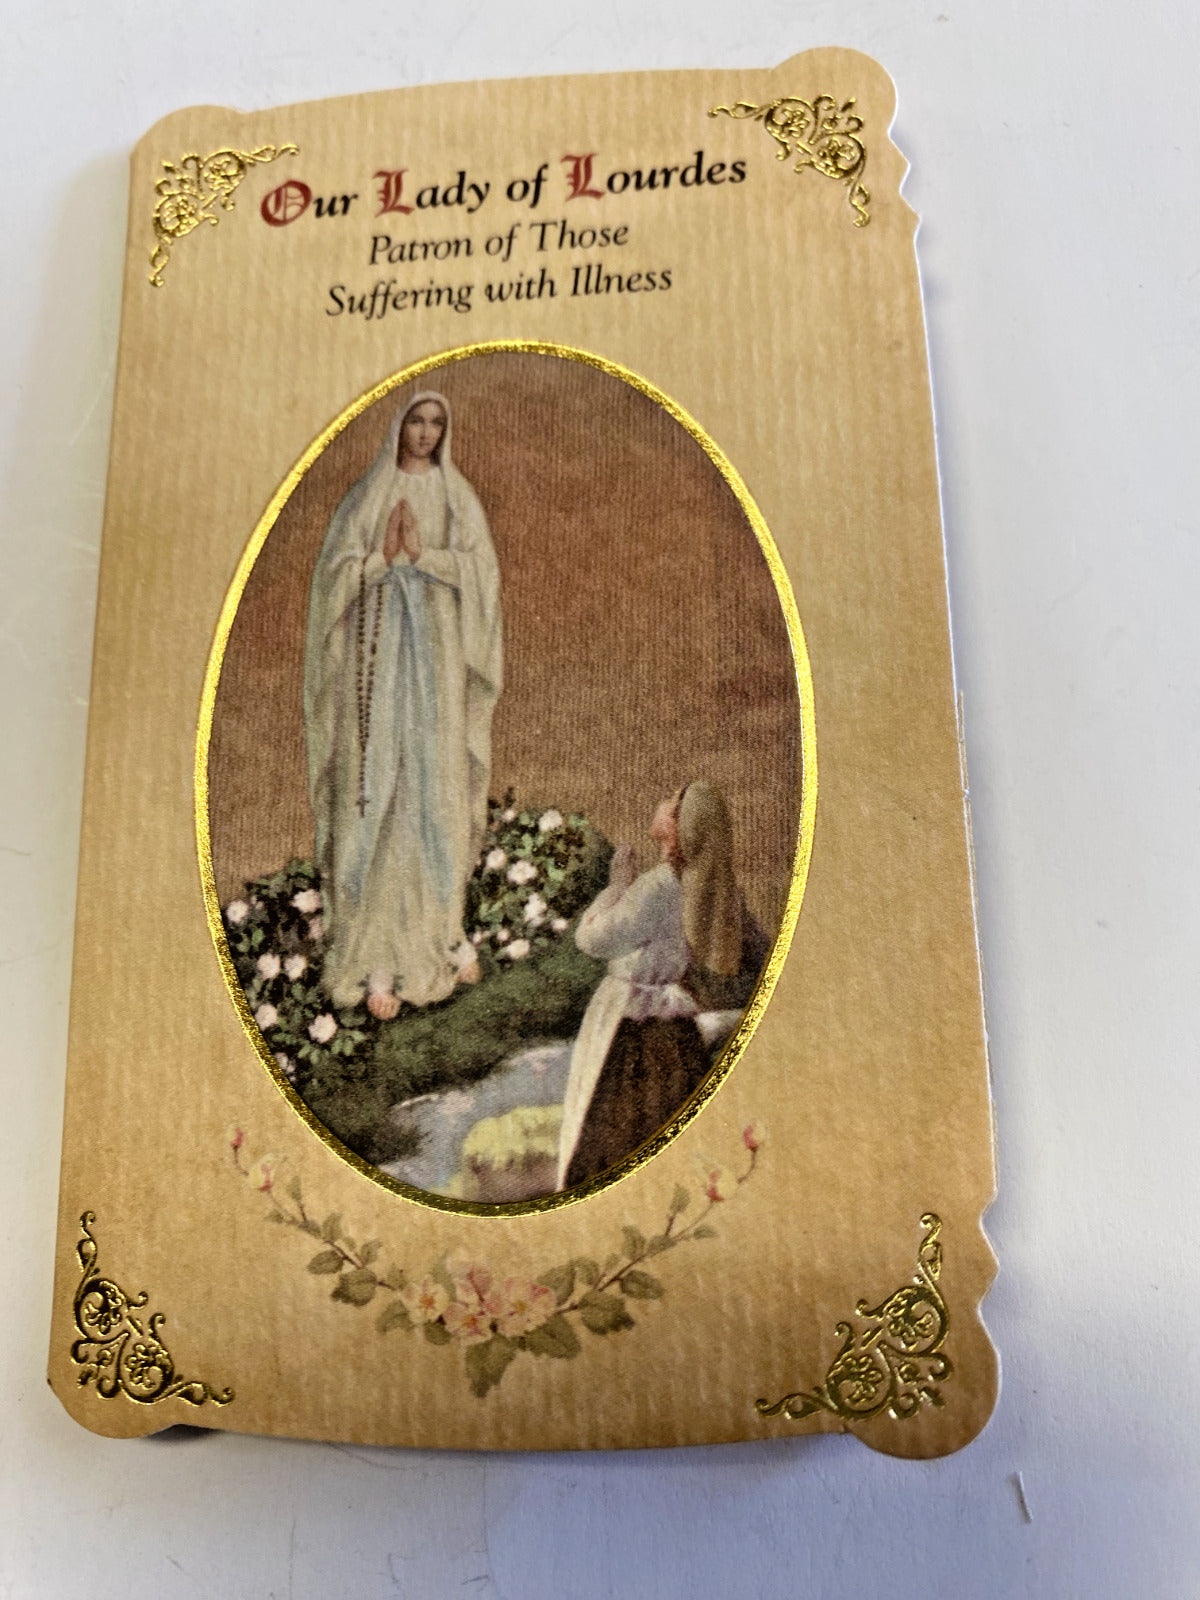 Our Lady of Lourdes "Suffering Illness Prayer" Card + Medal, New from Italy - Bob and Penny Lord